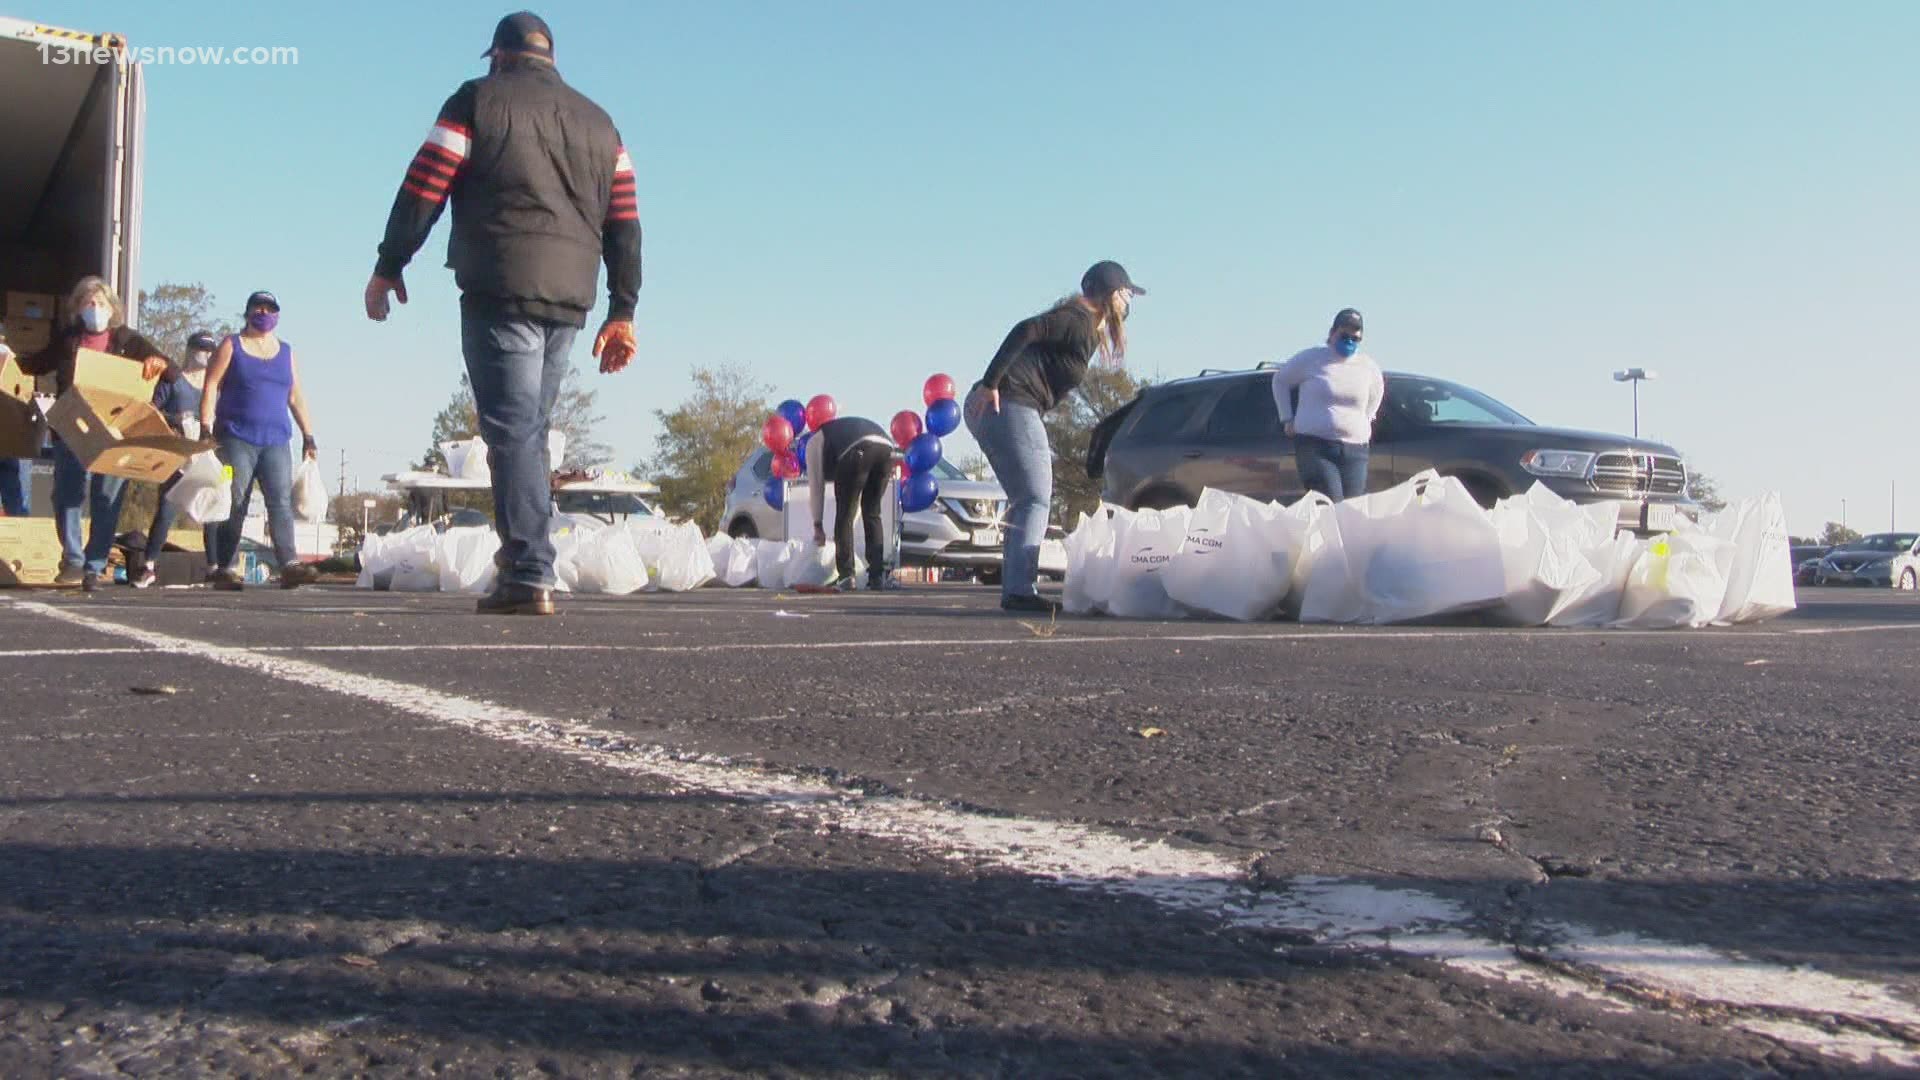 Teams worked to unloads 2,000 frozen turkeys and give them to people who needed a free turkey this Thanksgiving.